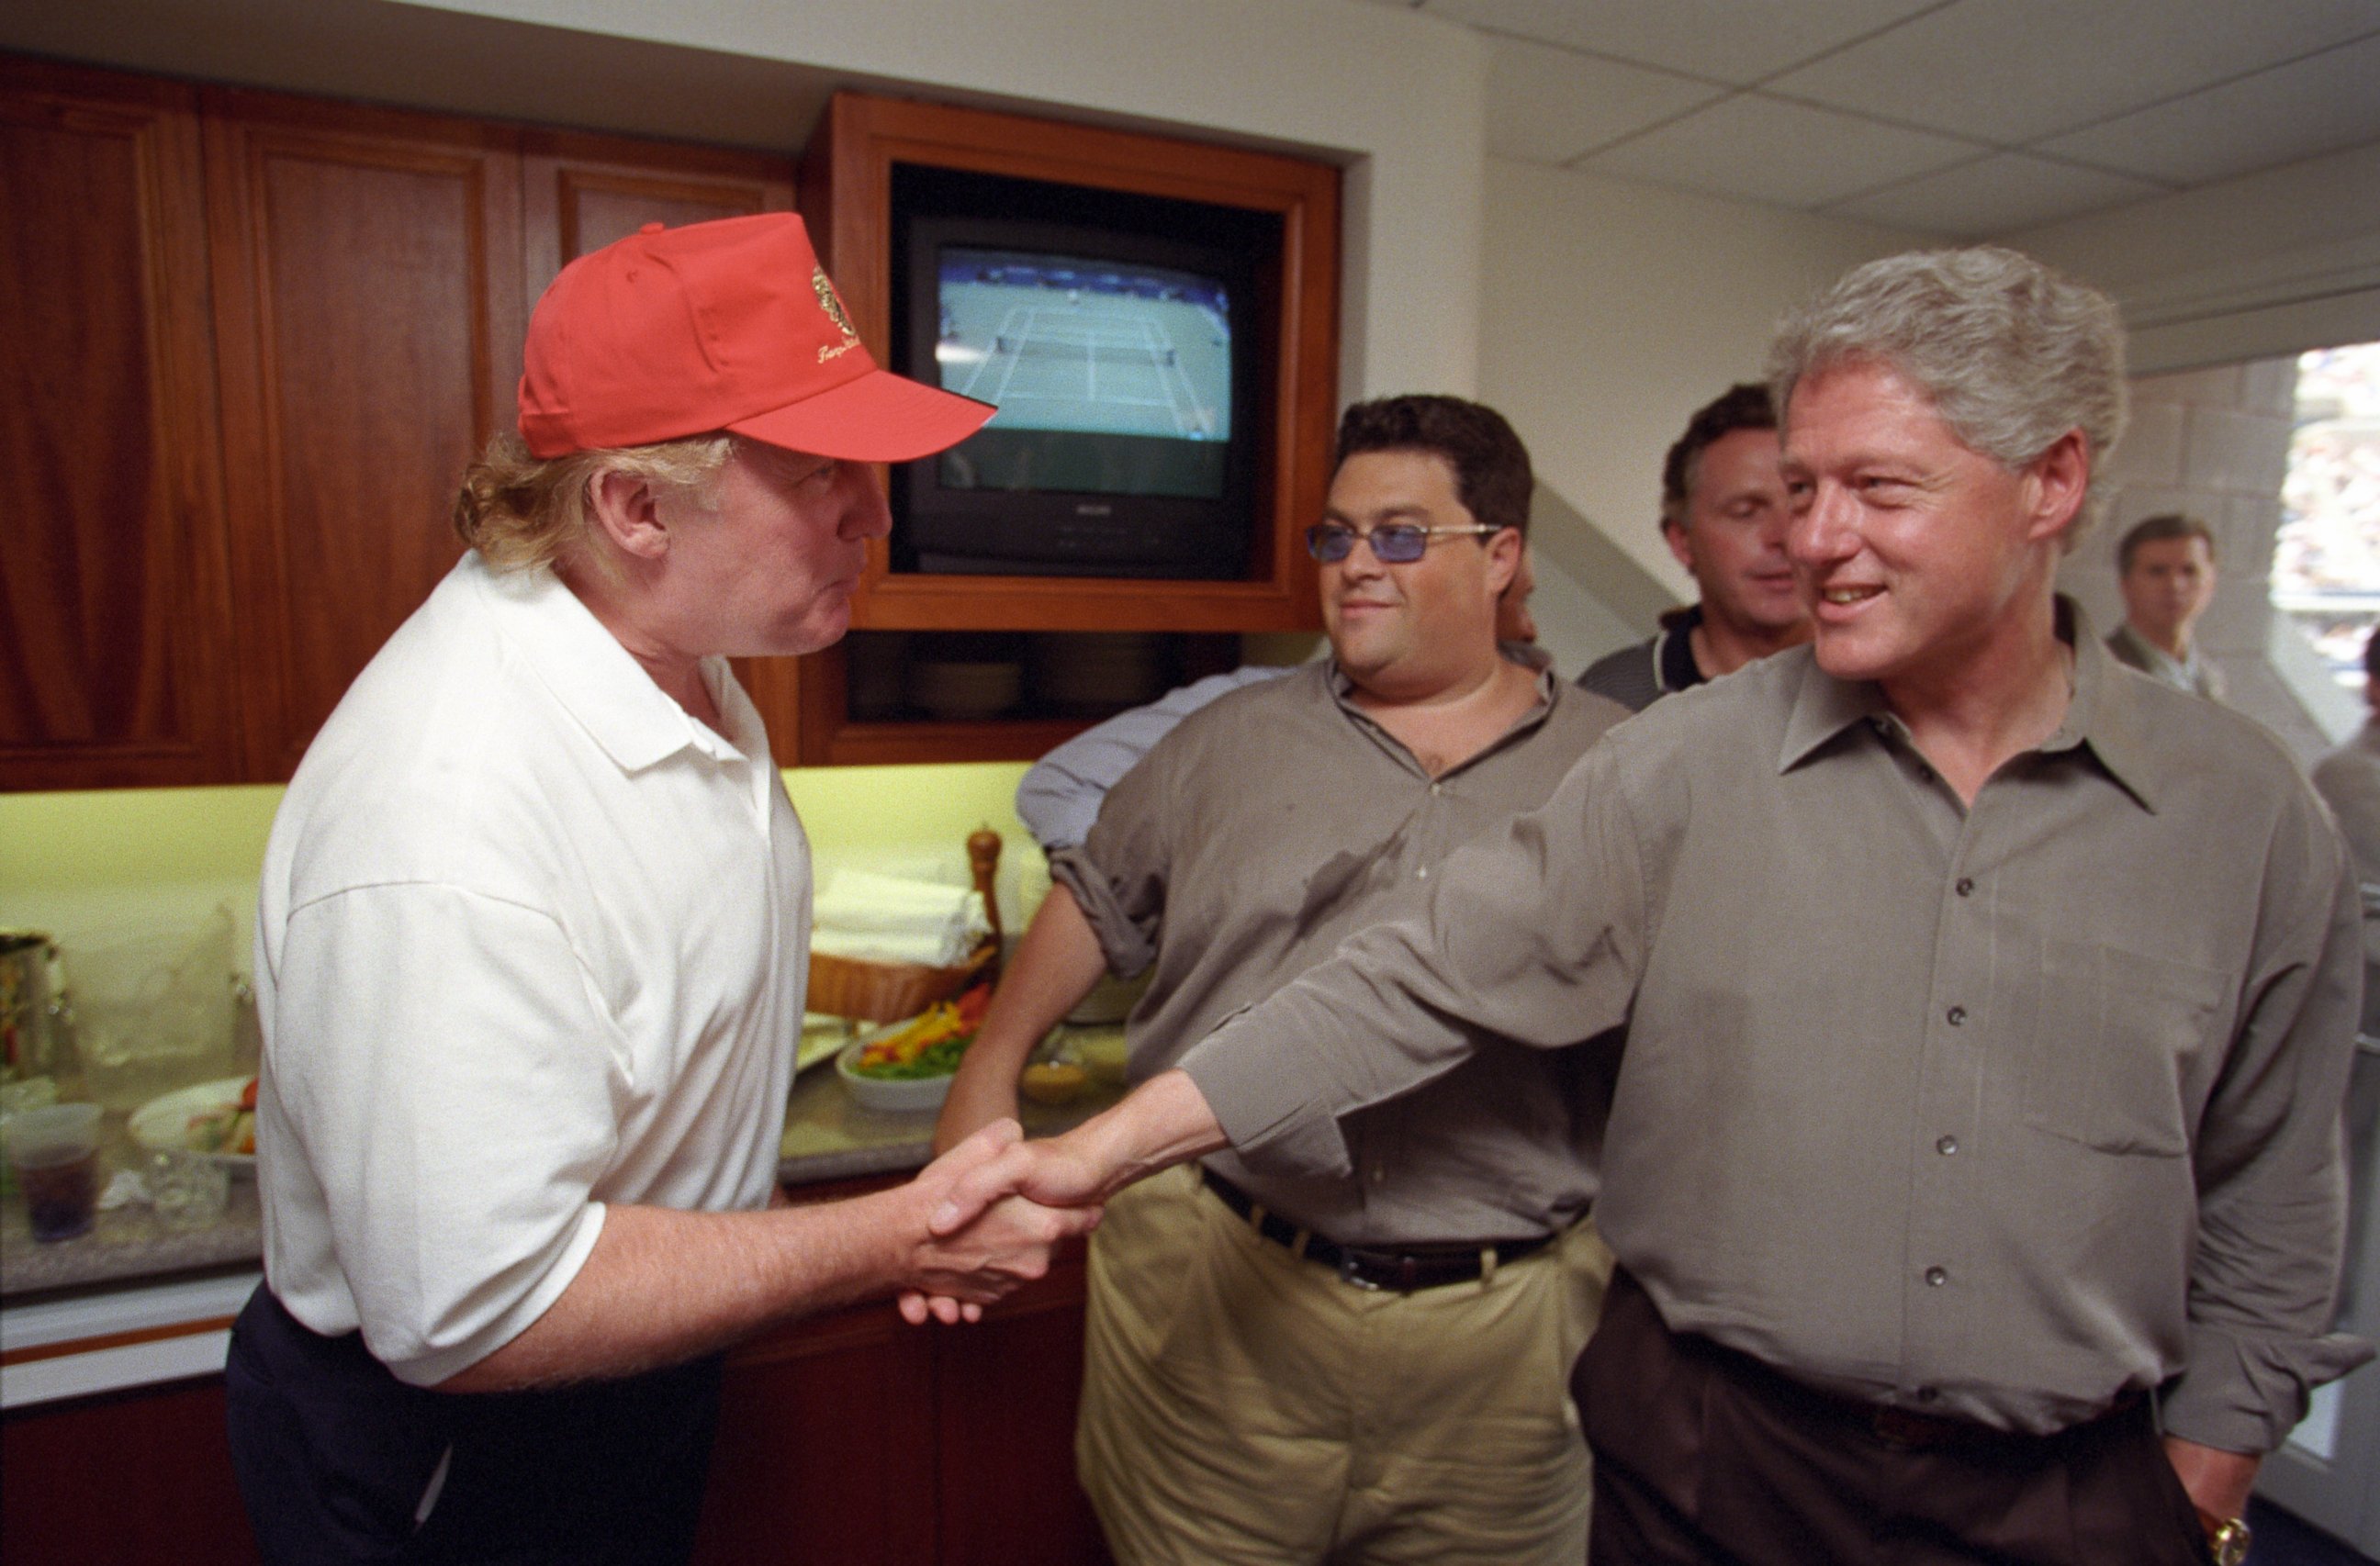 PHOTO: A collection of photographs were released by the Clinton Presidential Library on Sept. 9, 2016 during the year 2000. The photographs include President Clinton greeting Donald Trump at Trump Towers in New York on June 16, 2000.
